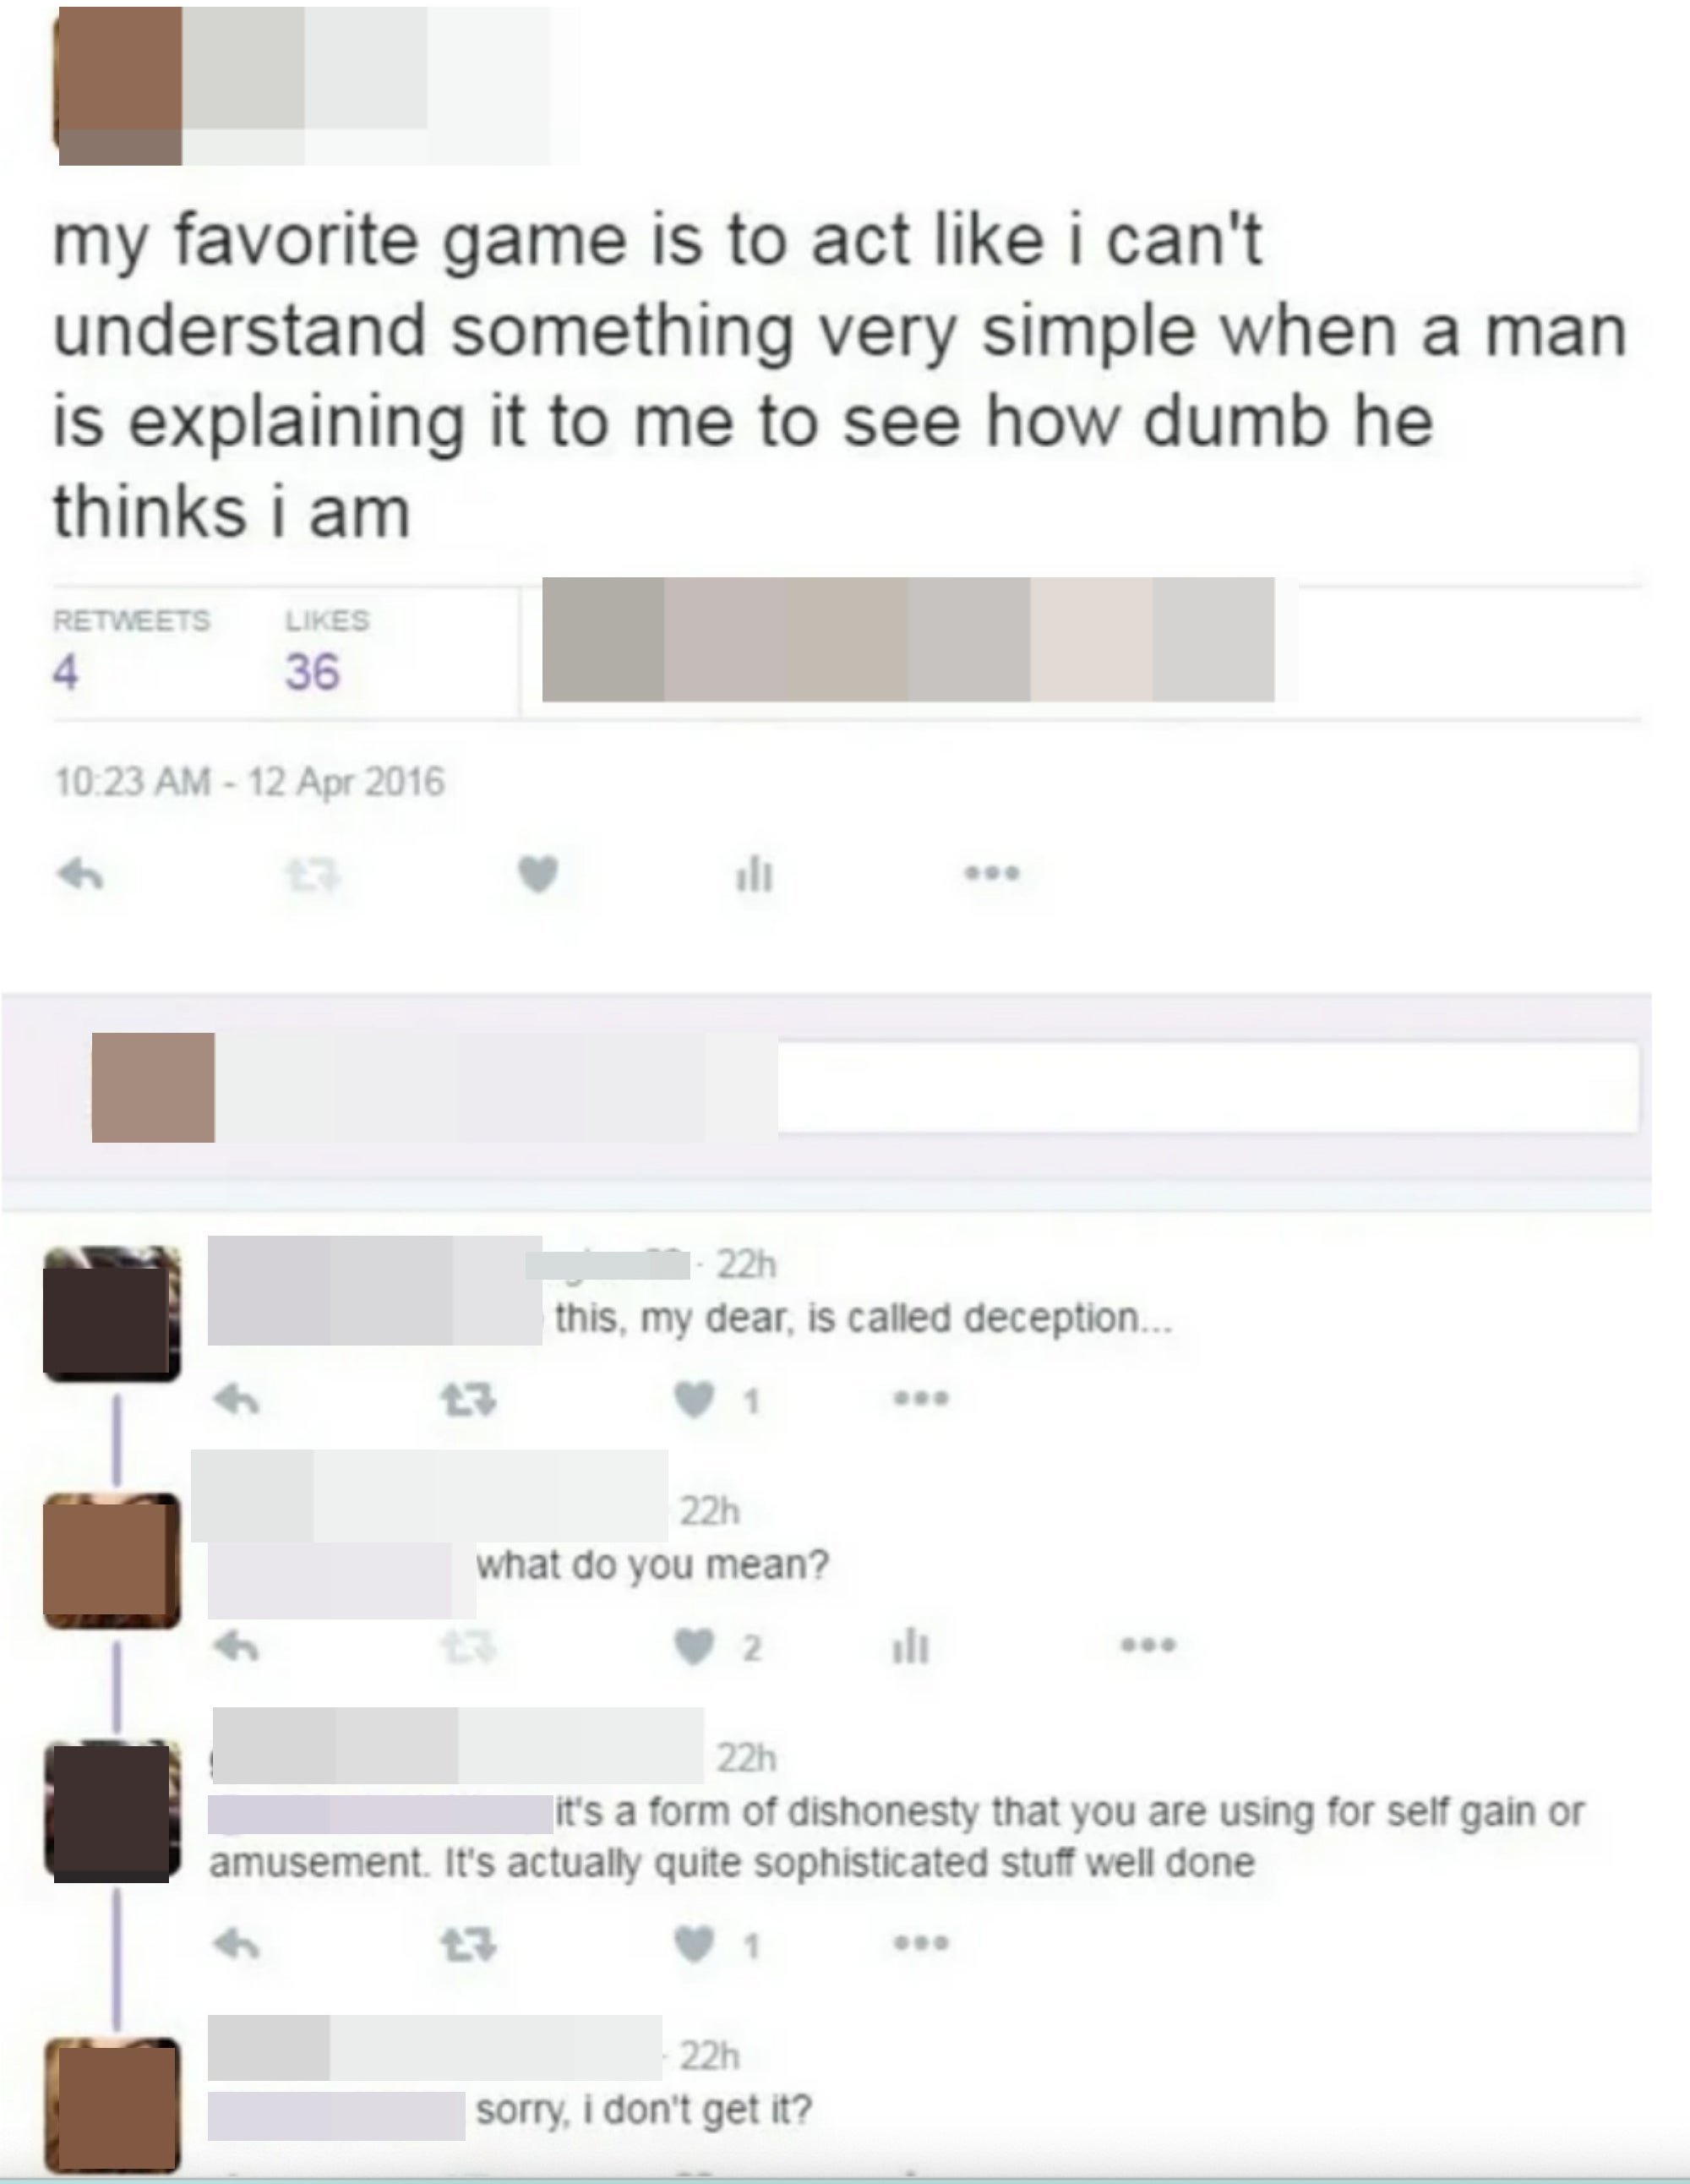 woman saying she pretends to be dumb to see how much a man thinks she really is dumb